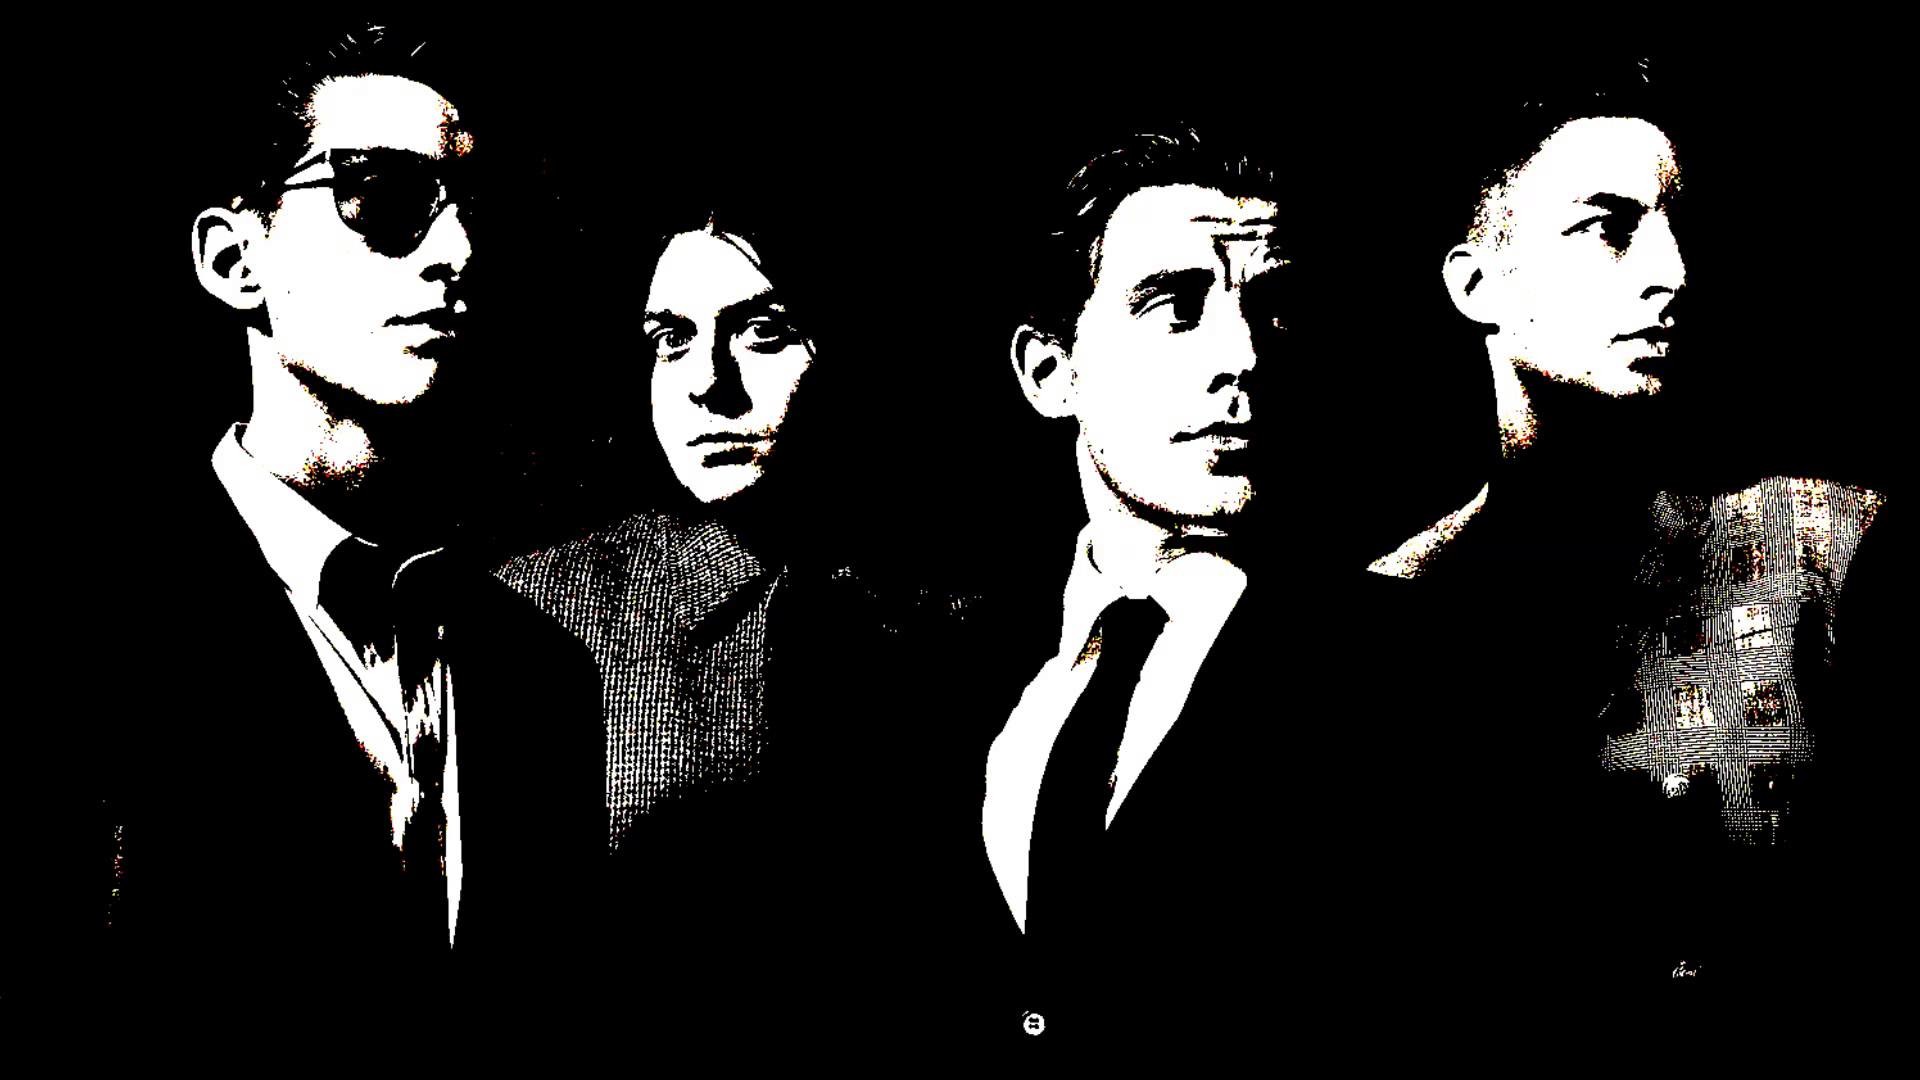 1920x1080 Top Arctic Monkeys Hd Background Images for Pinterest